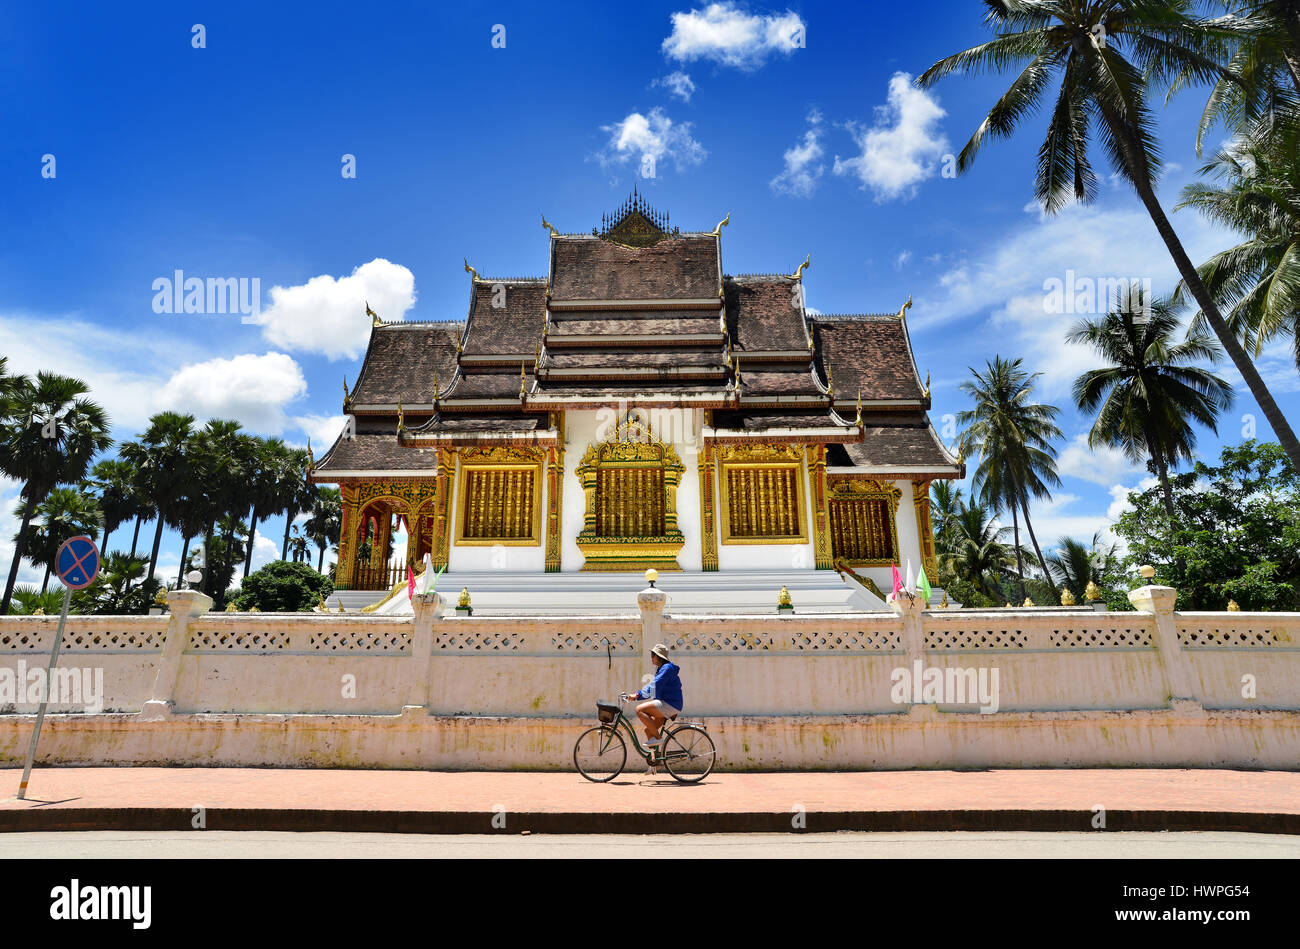 Loungprabang,Laos - August 7,2015: Buddhist Temple at Loungprabang royal palace and unfocus of unidentified woman cycling on the main street of the ci Stock Photo